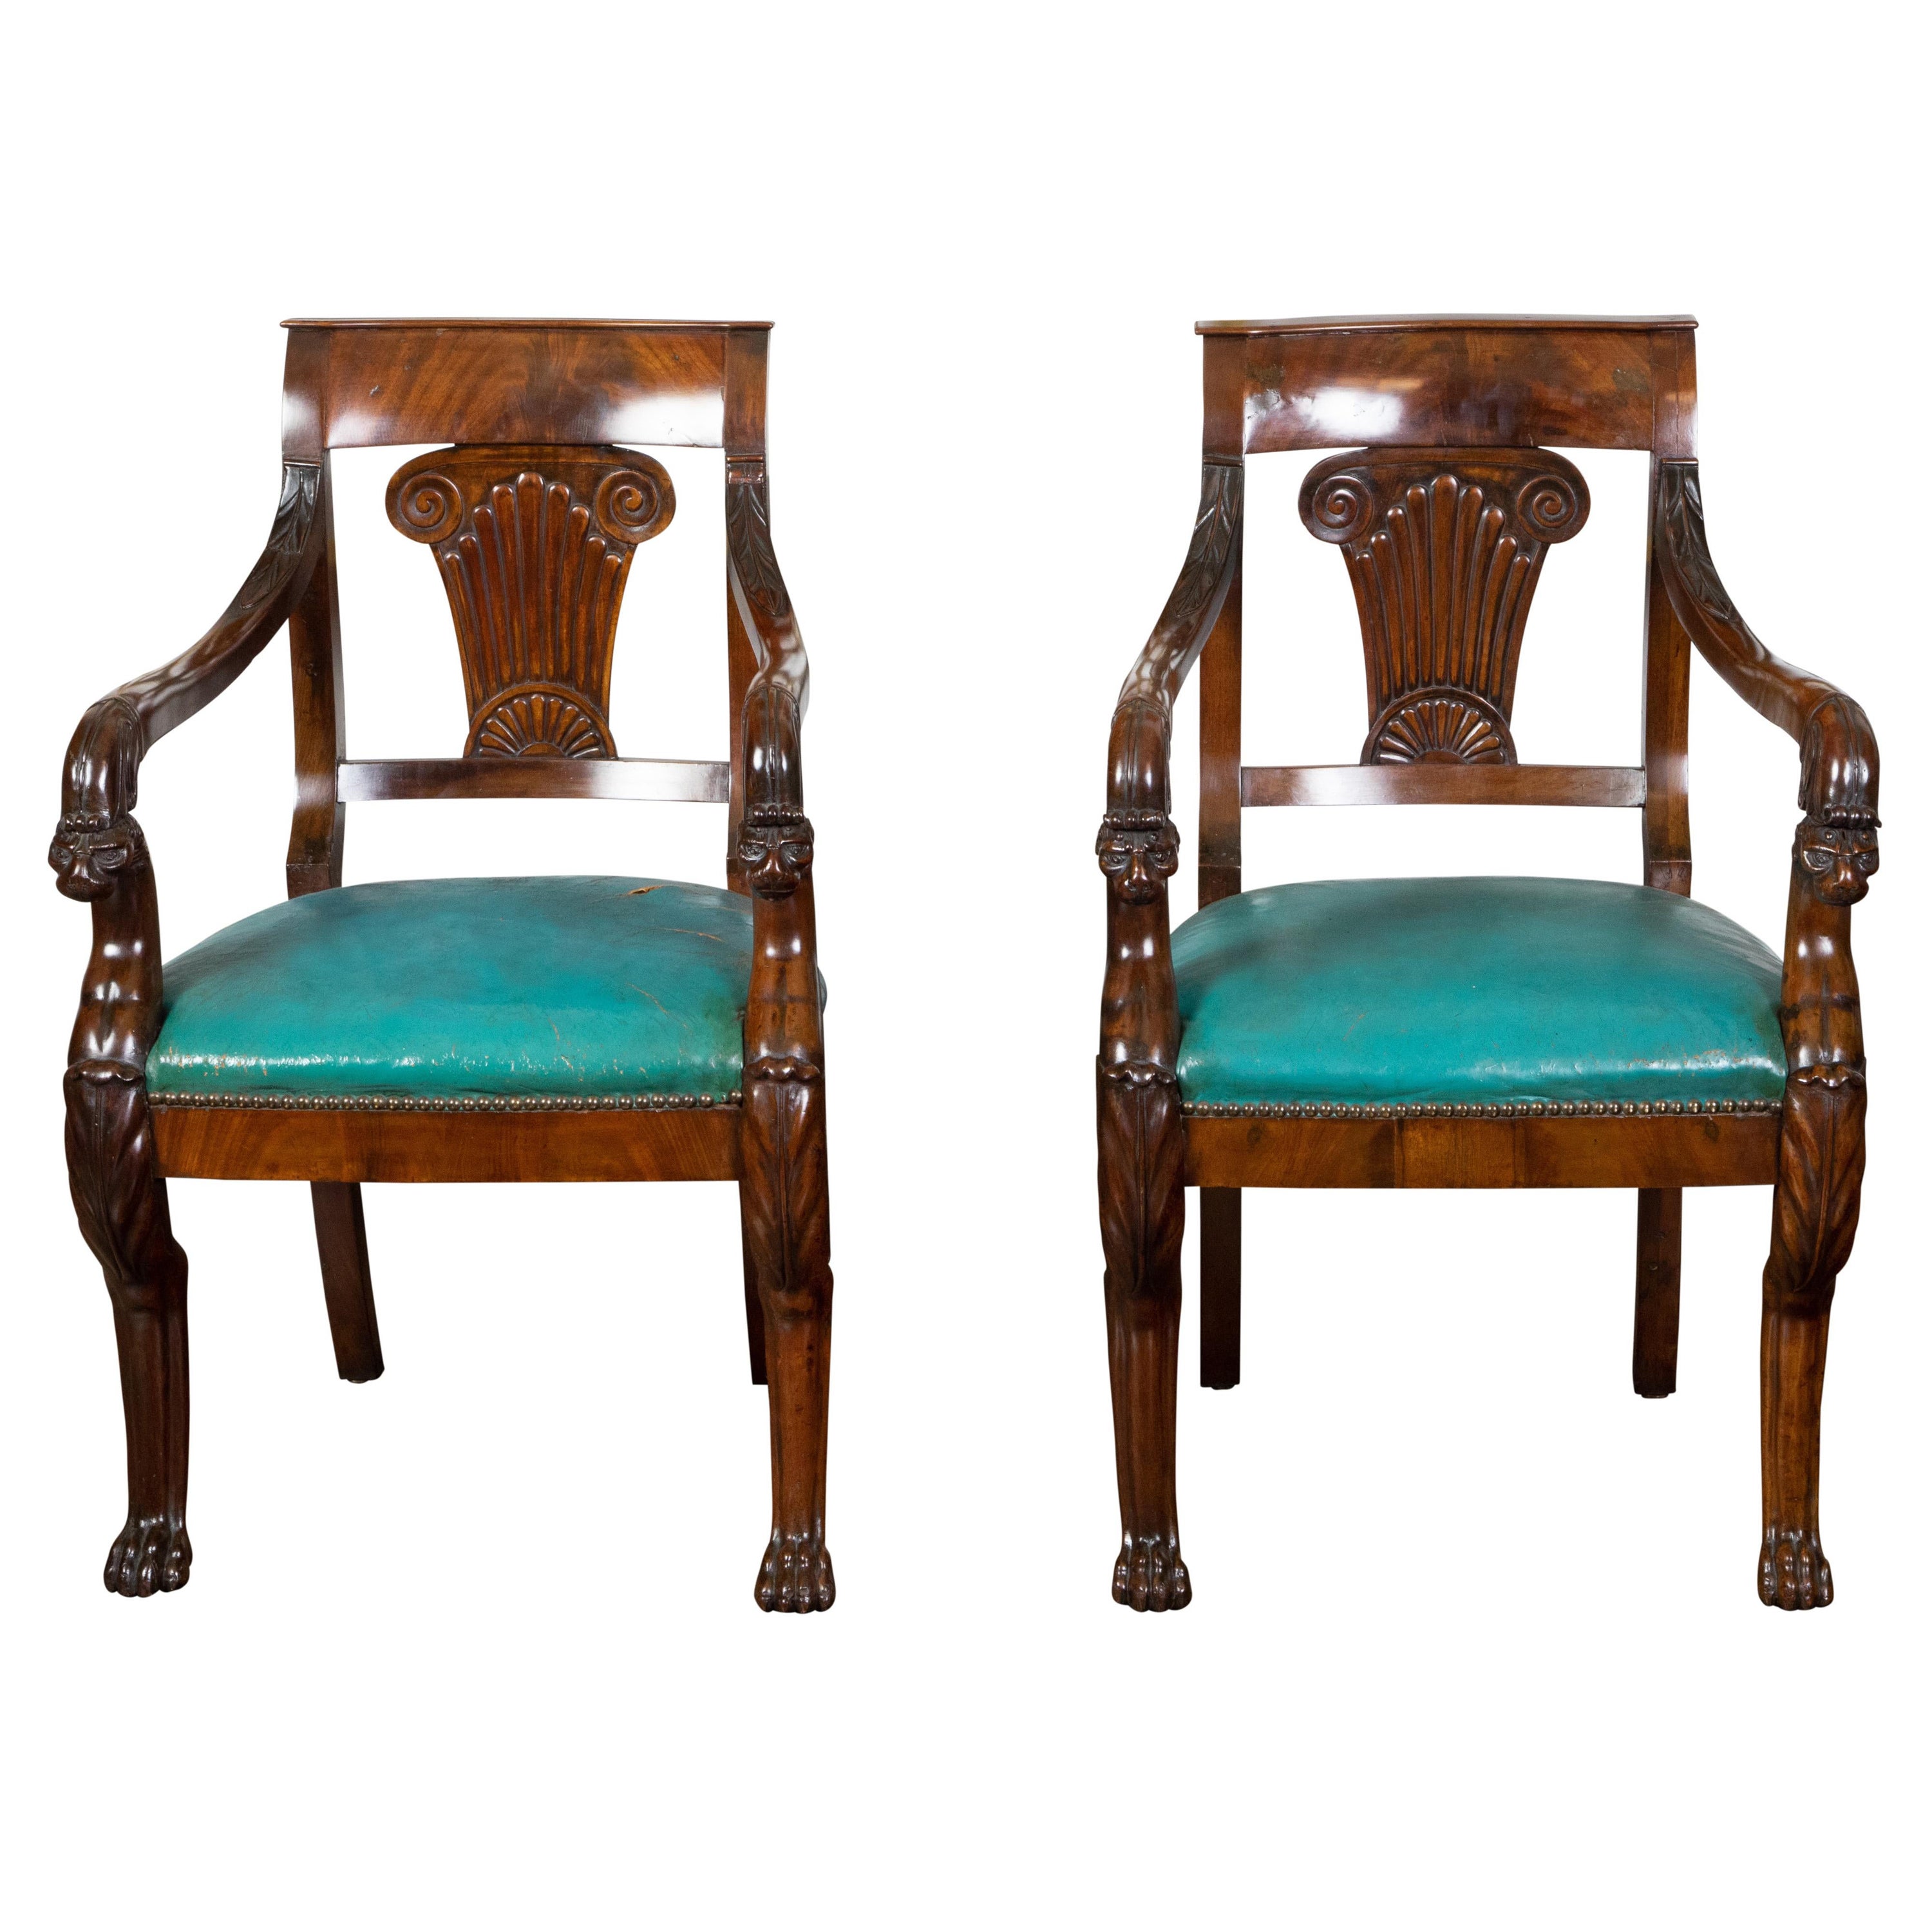 Pair of English Regency 1840s Mahogany Chairs with Ionic Capitals and Griffons